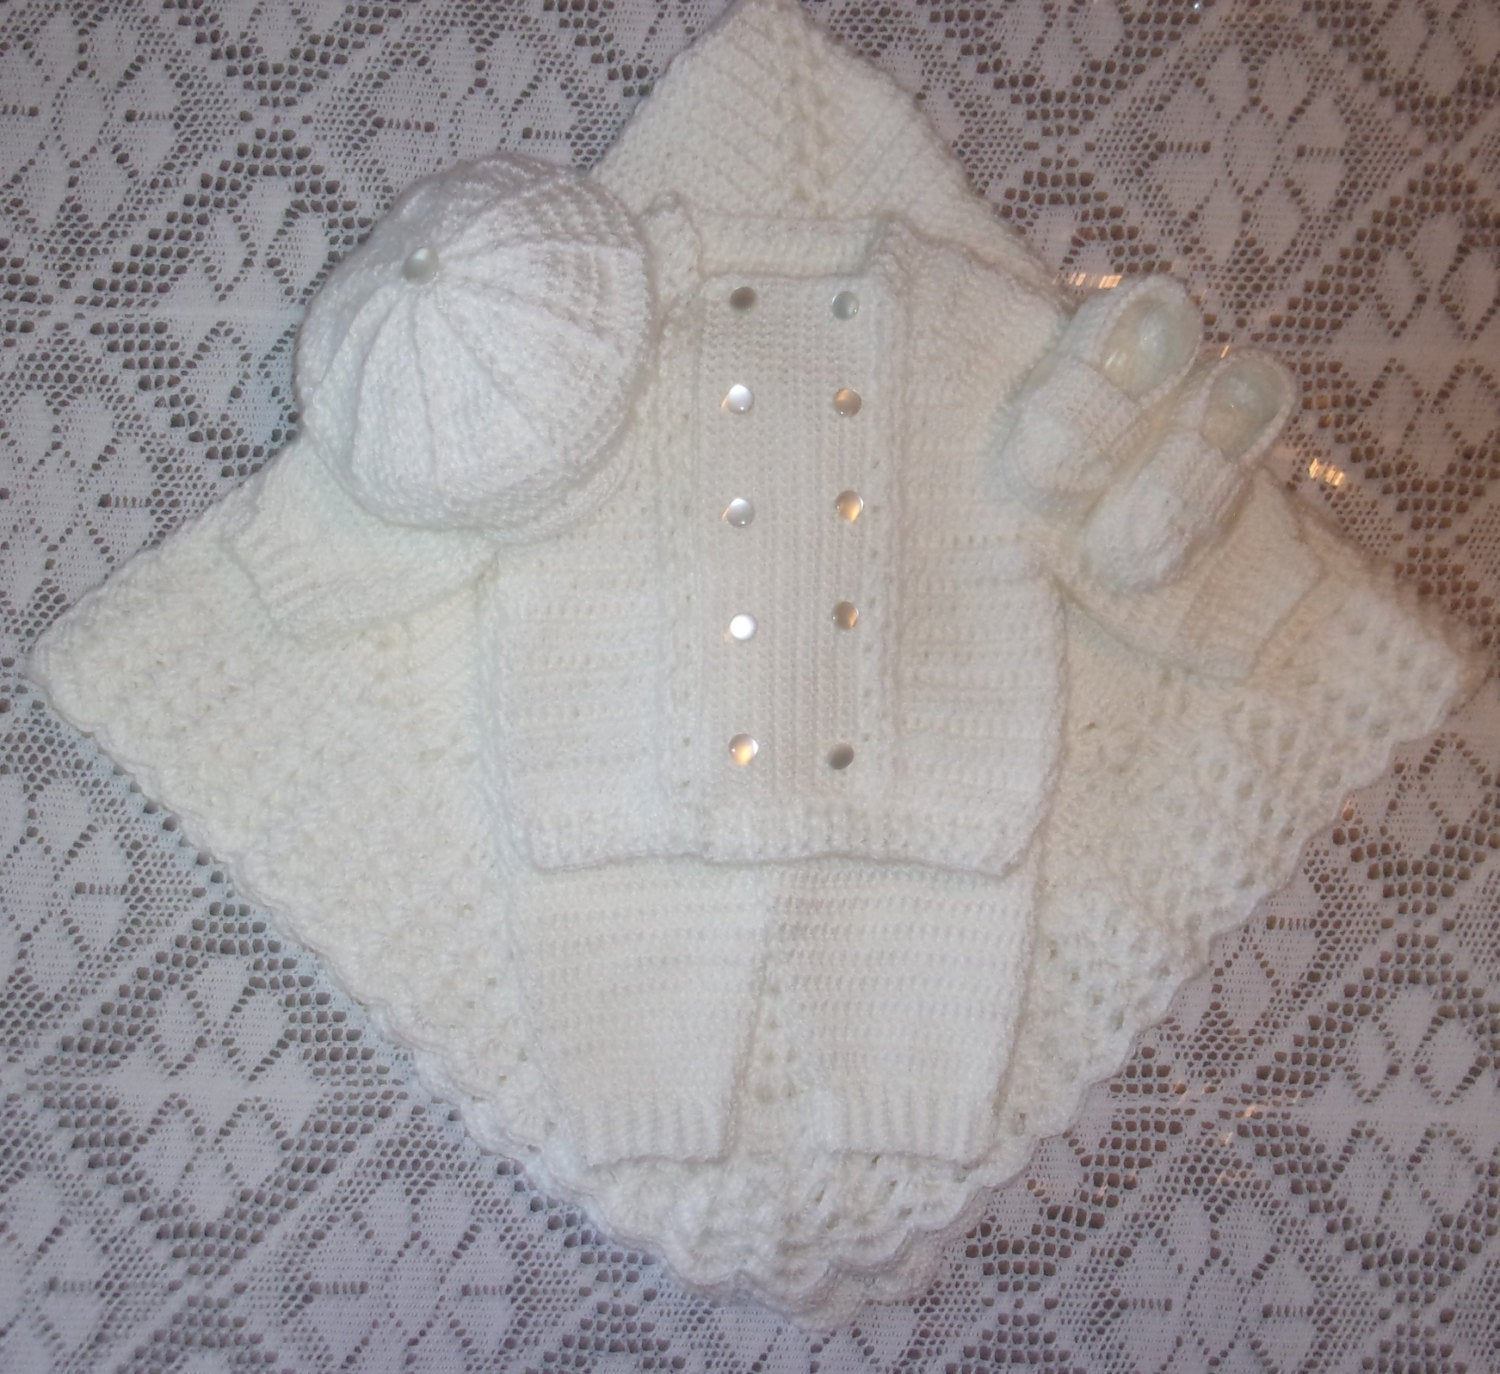 Free Knitting Patterns For Baby Sets Crochet Ba Boy White Sweater Set Layette Wleggings Brimmed Cap Booties And Blanket Perfect For Christening Take Home Ba Shower Gift